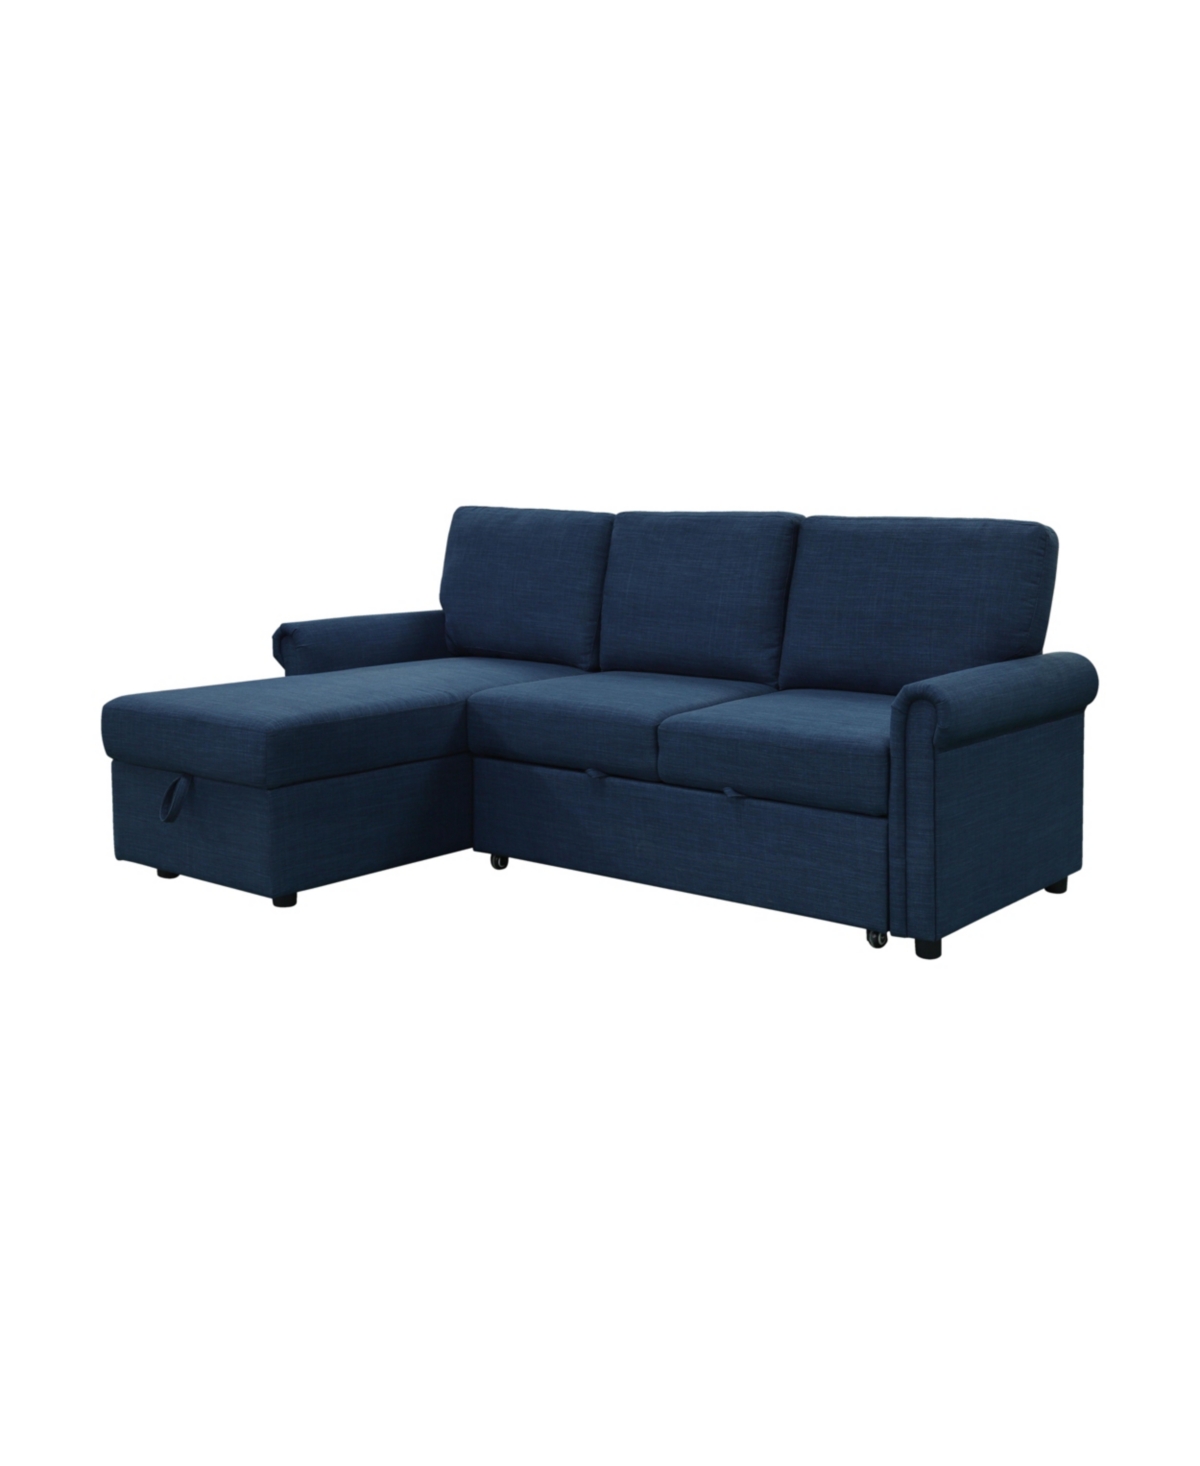 Abbyson Living Hamilton 2 Piece Storage Sofa Bed Reversible Sectional In Navy Blue